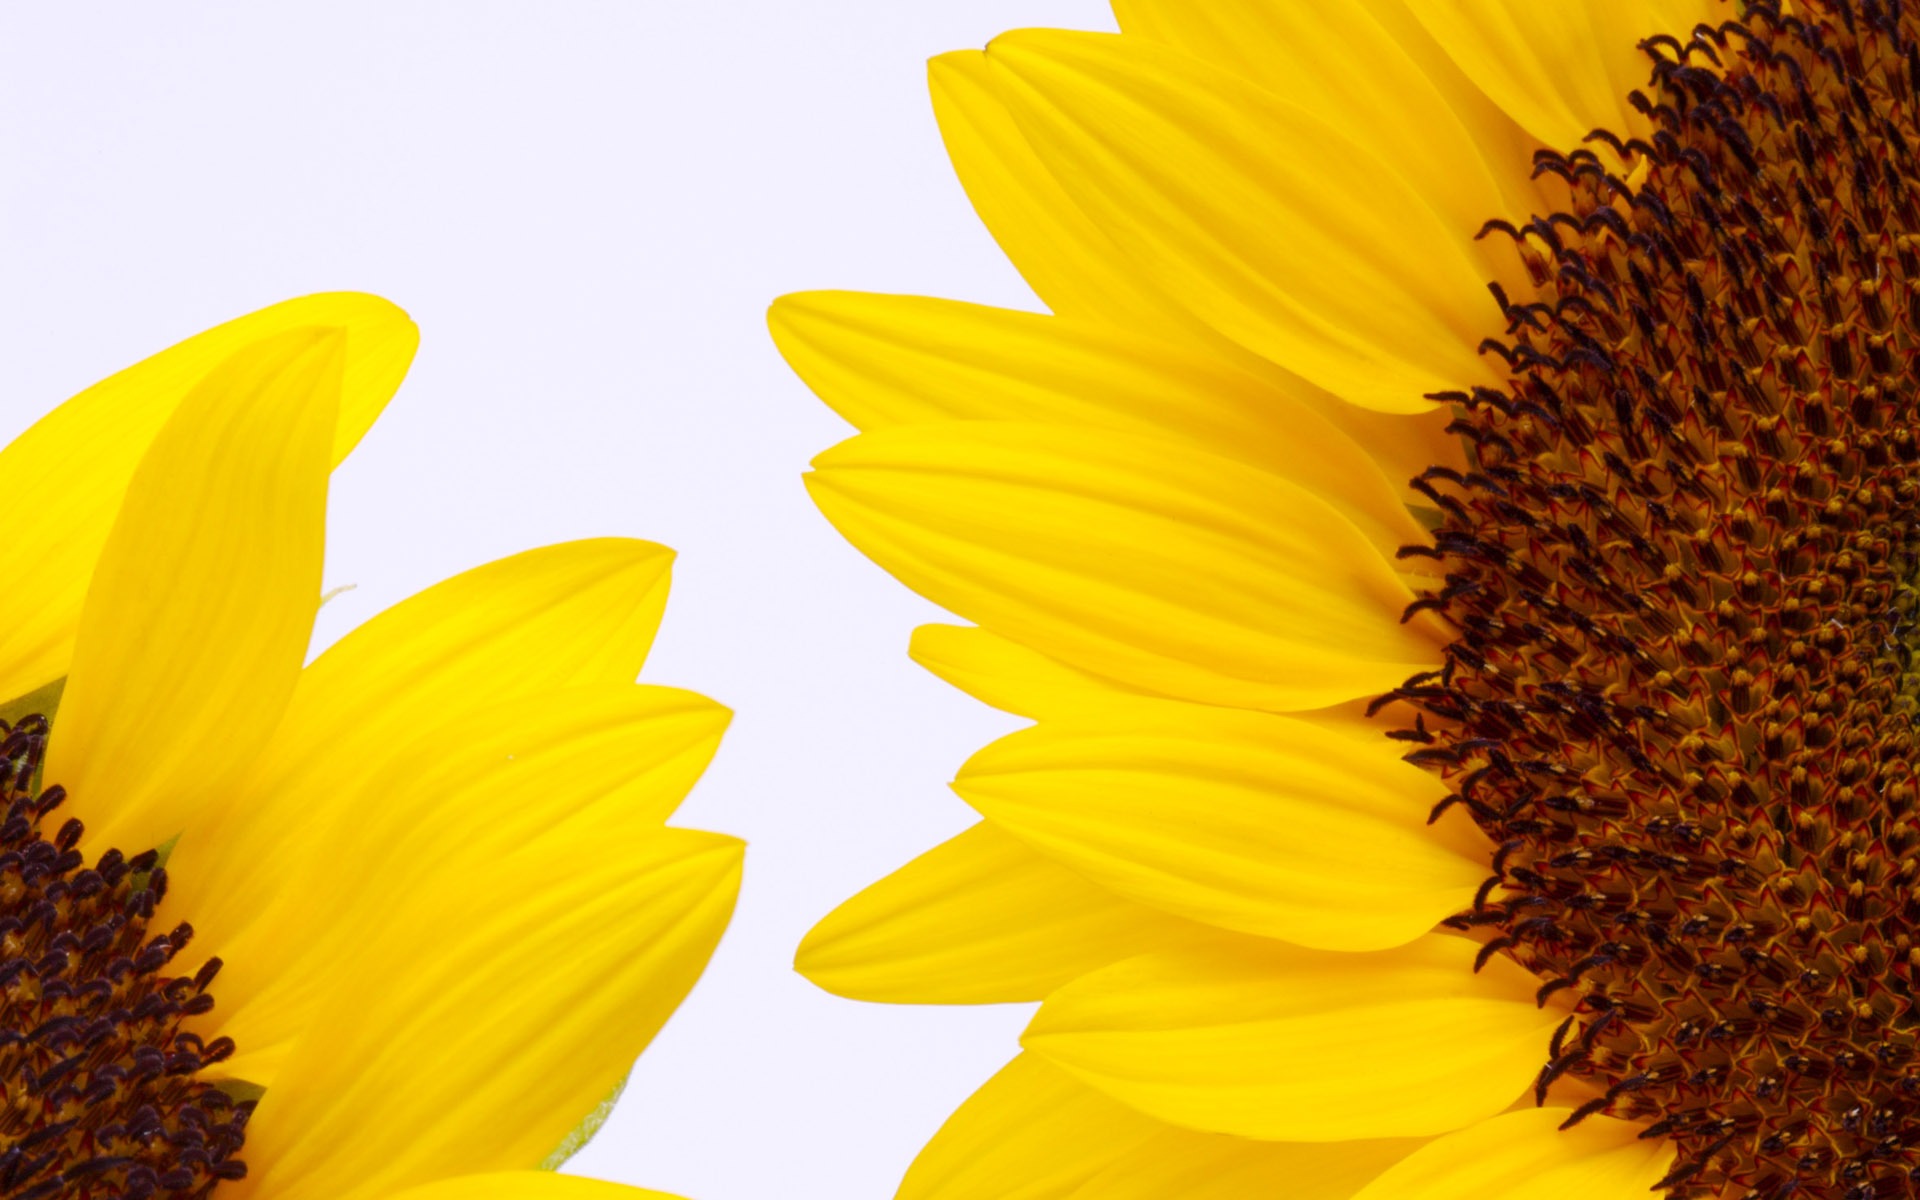 Sunny sunflower photo HD Wallpapers #31 - 1920x1200